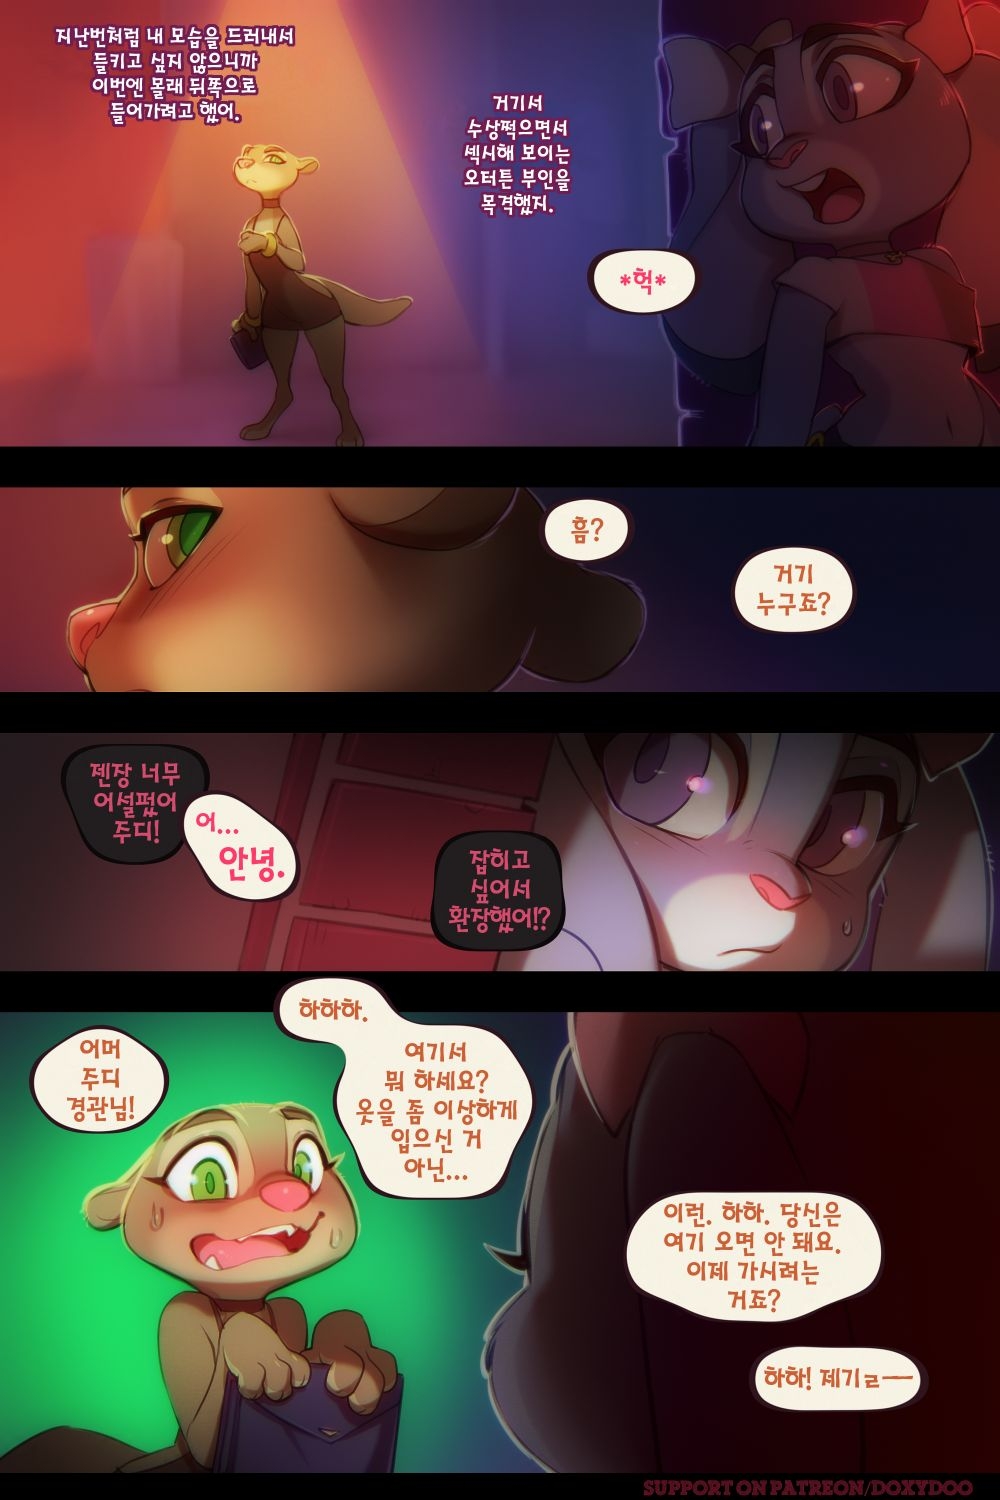 [Doxy] Sweet Sting Part 2: Down The Rabbit Hole | 달콤한 함정수사 2부: 토끼 굴속으로 (Zootopia) [Korean] [Ongoing] 7